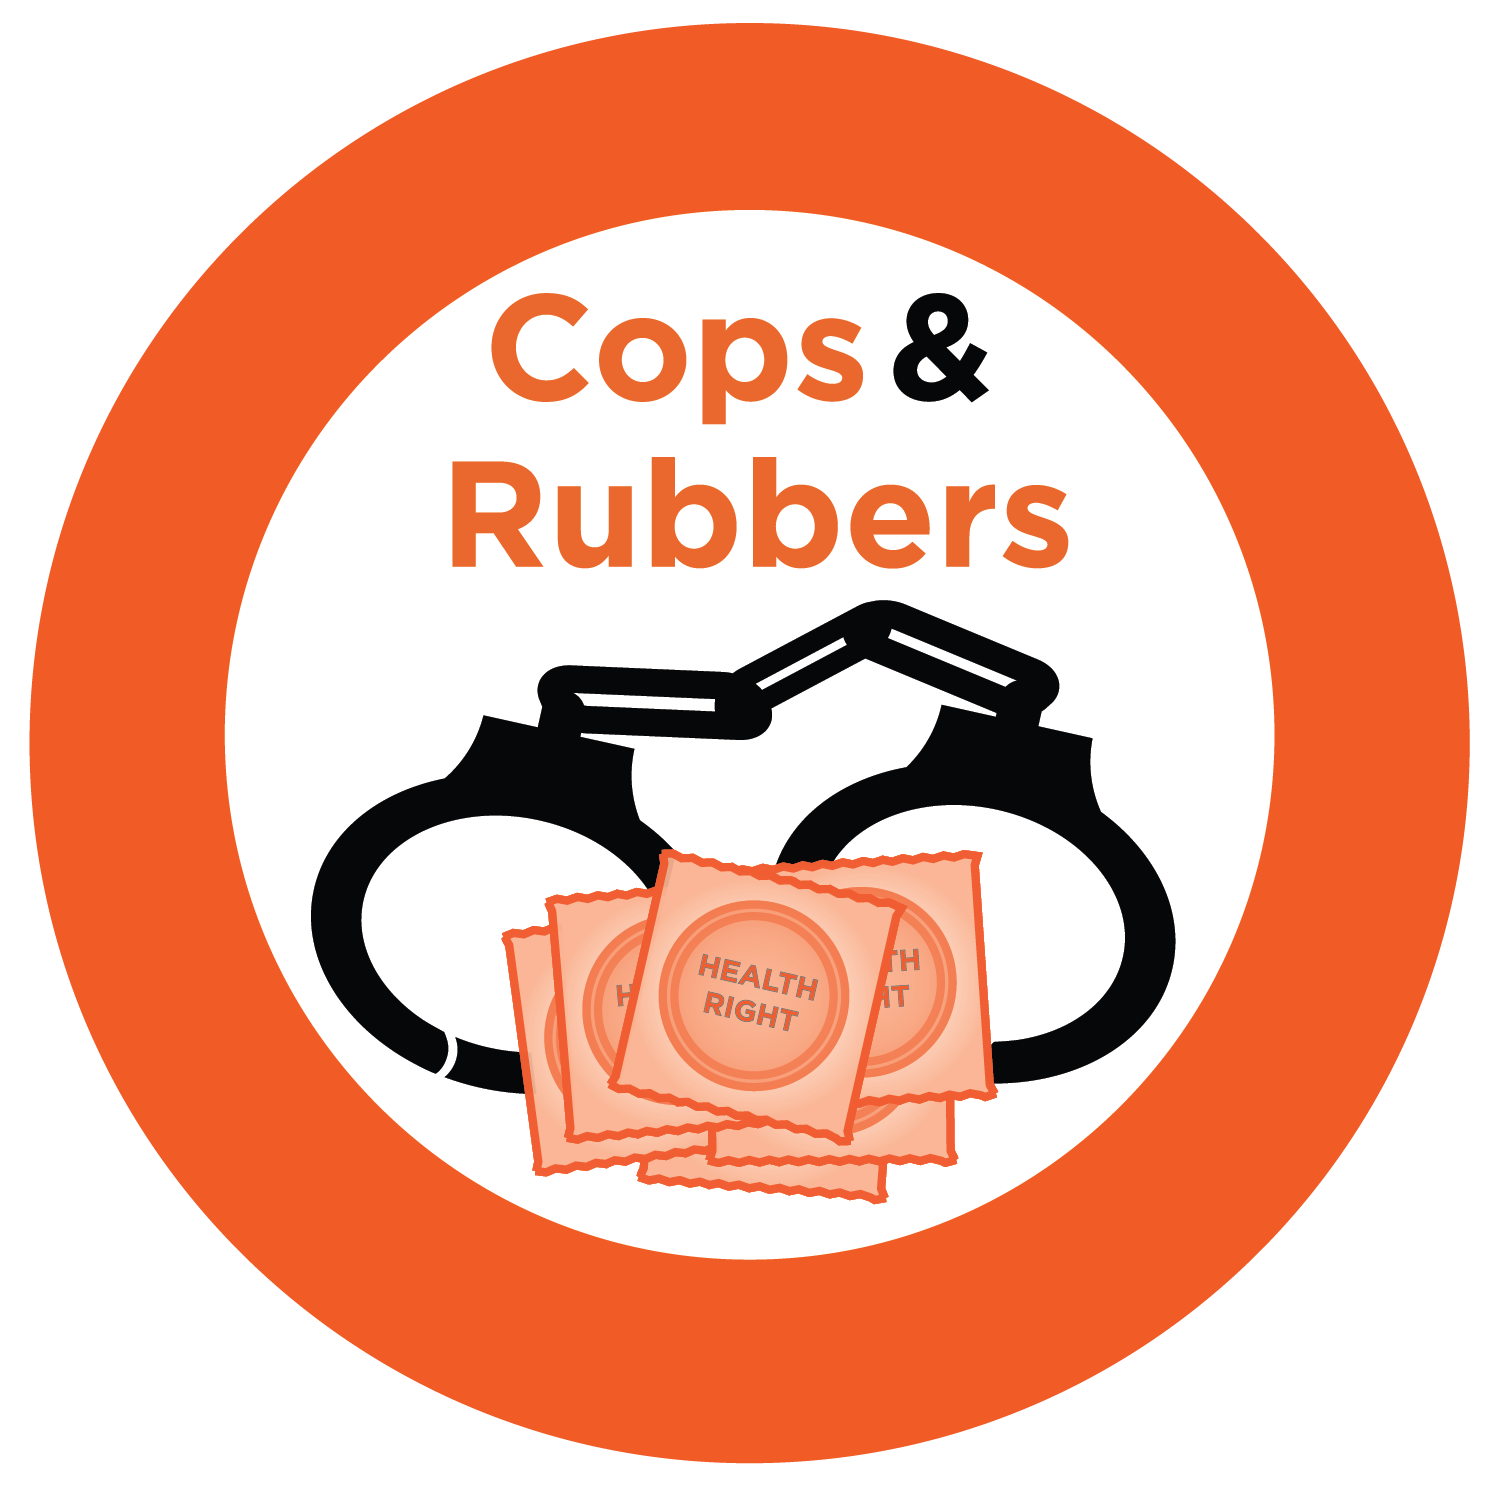 Cops & Rubbers game logo